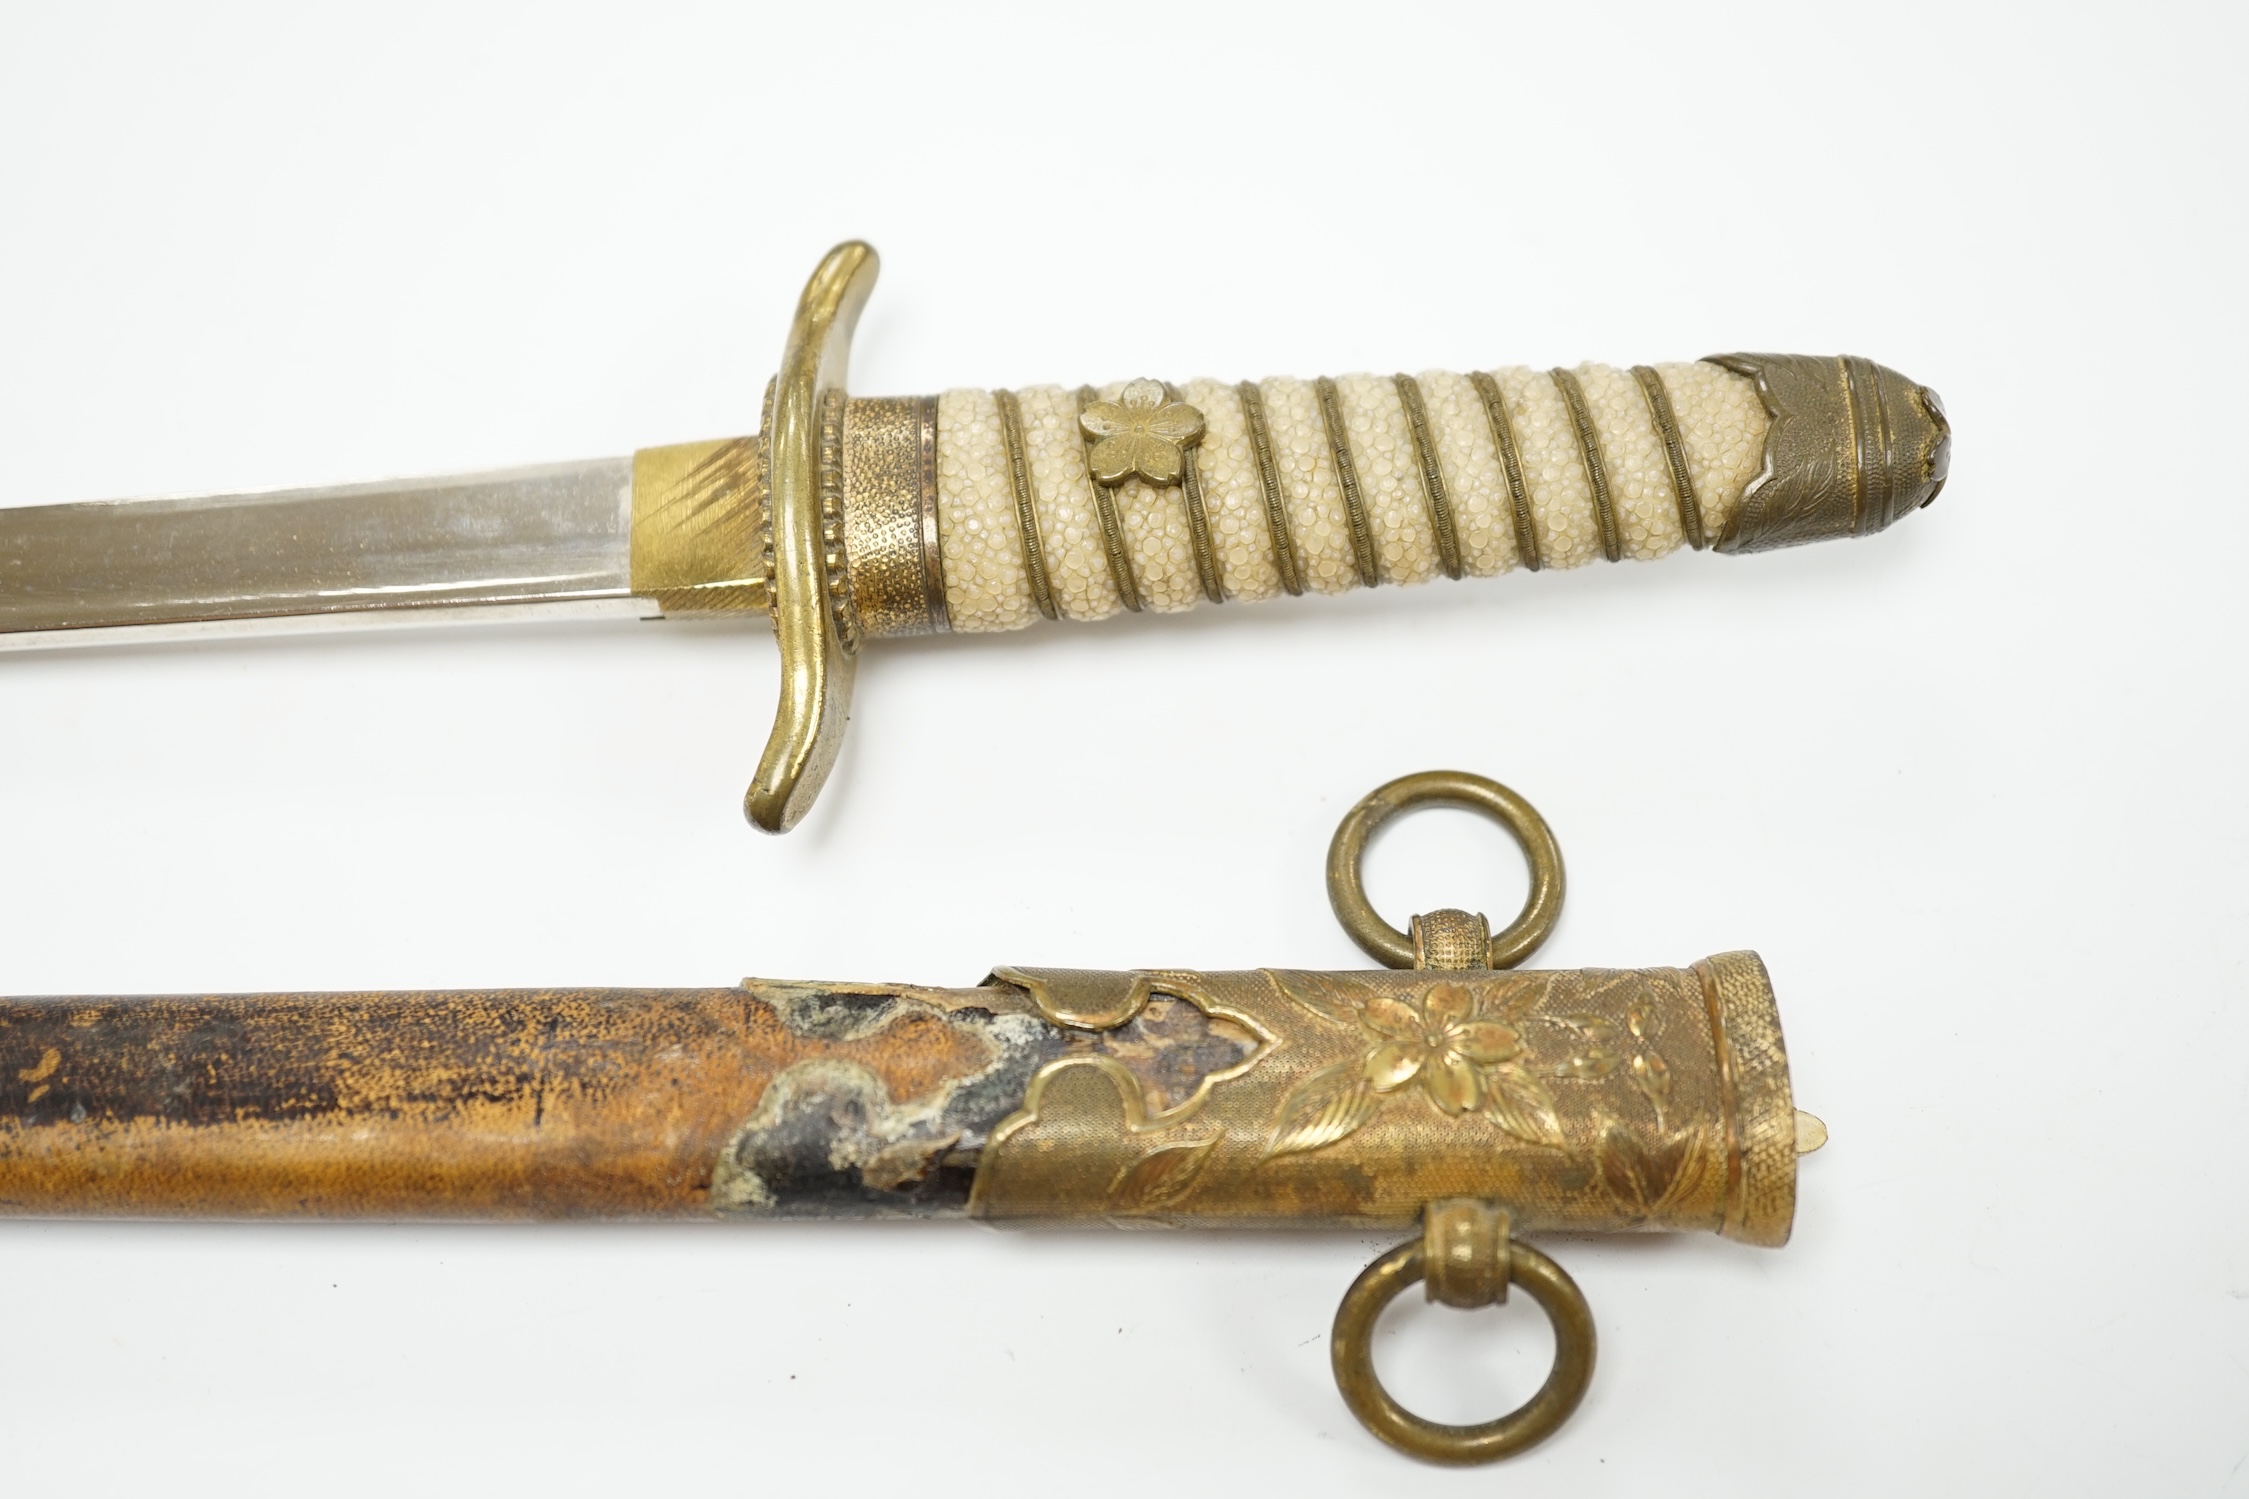 A dagger with brass fittings and a shagreen grip, in a leather covered scabbard, blade 21cm. Condition - losses to leatherwork and scabbard, splits to shagreen grip and some wear overall.